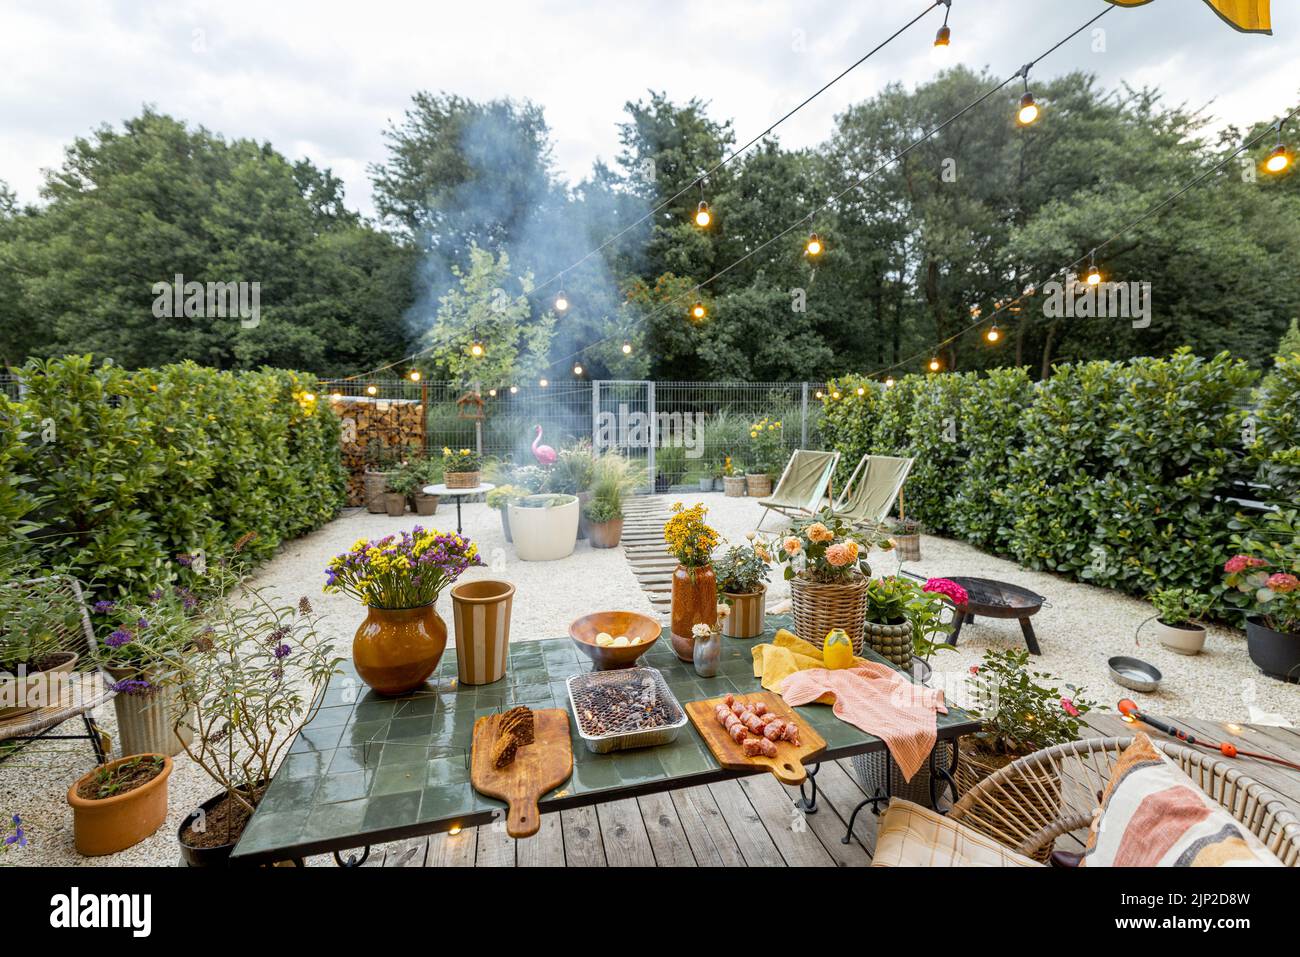 Atmospheric and cozy garden with dining place on terrace at dusk. Cooking food on disposable grill on beautiful table decorated with flowers Stock Photo